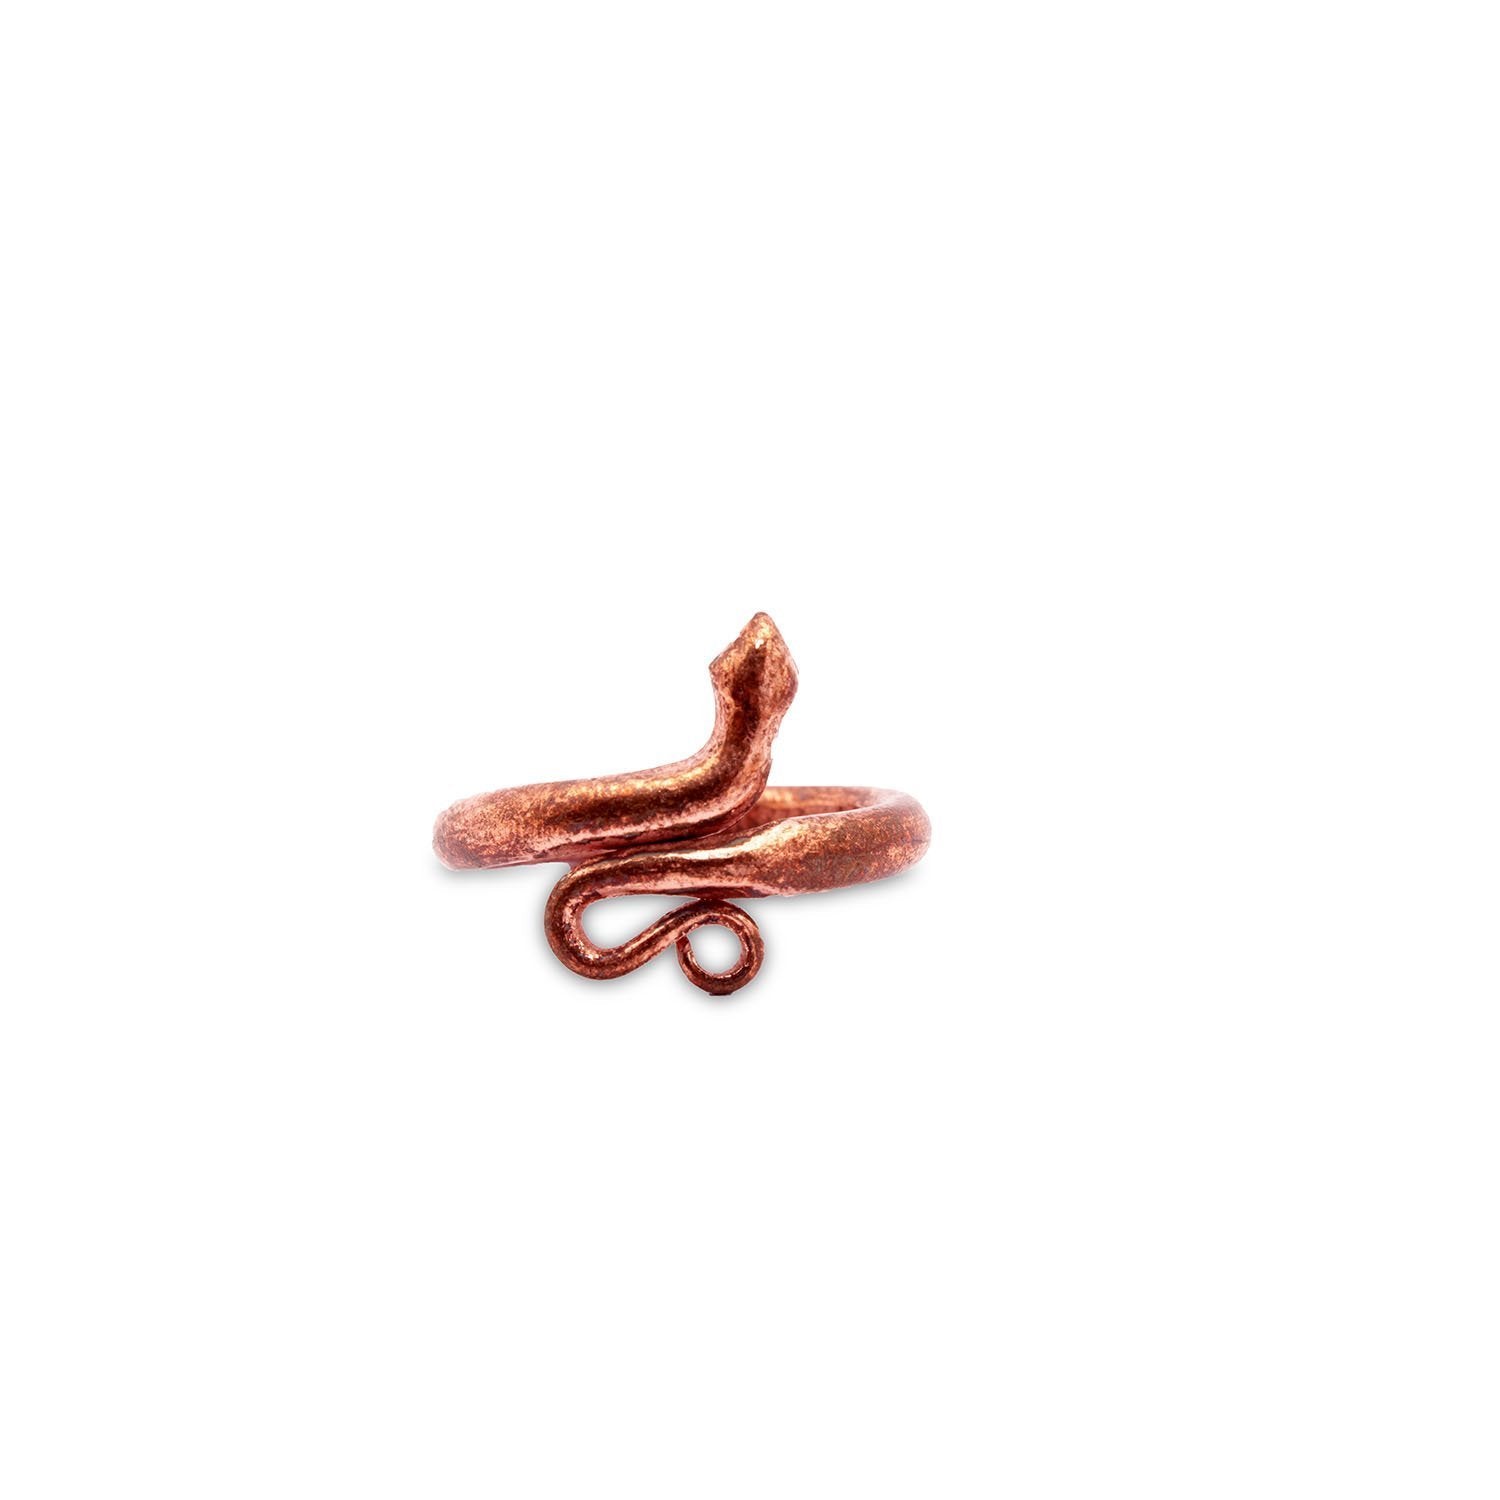 Copper Snake Ring / Solid Copper / Size 8 / Serpent Ring / Hammered /  Minimalist / Egyptian Snake Ring / Forged / Copper Jewelry - Etsy